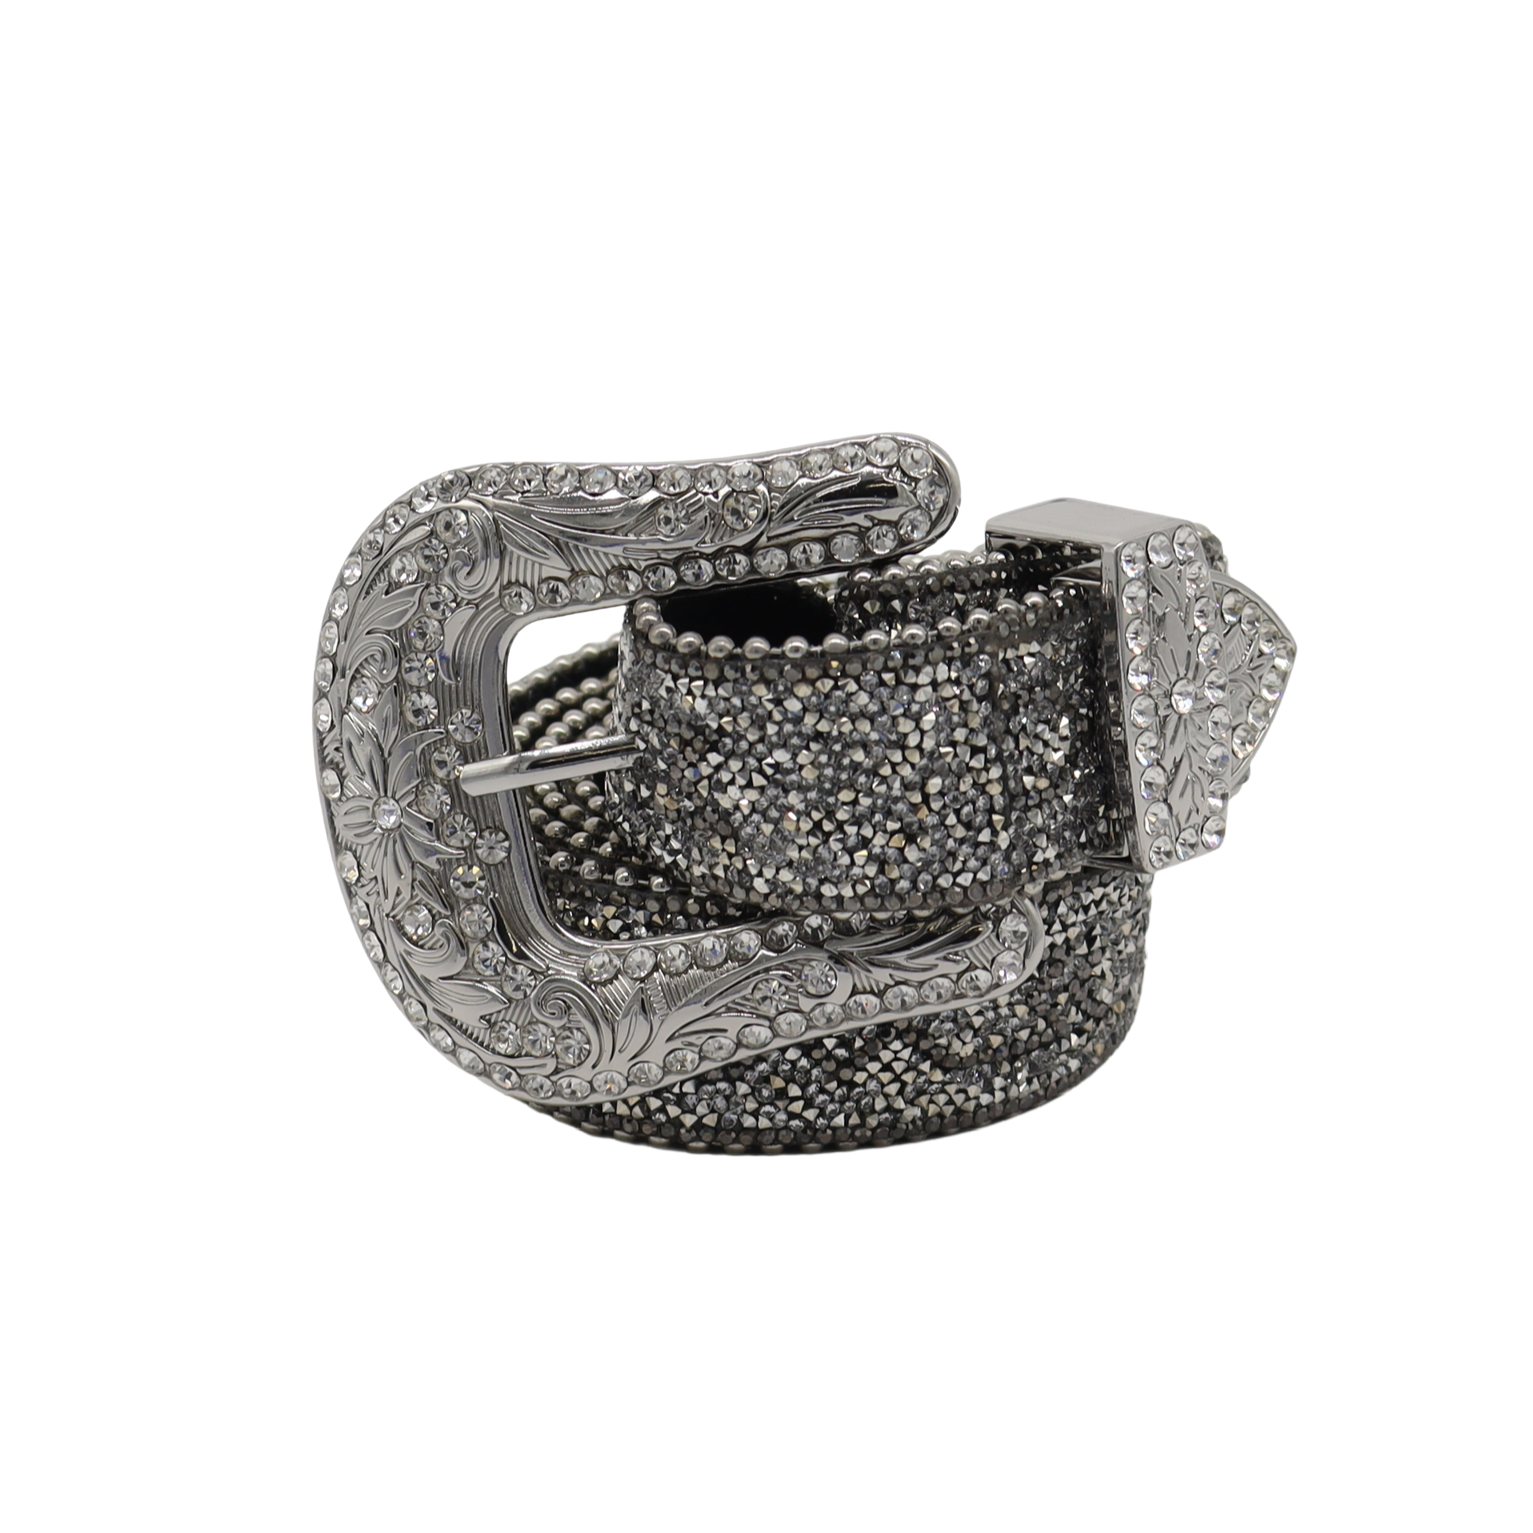 KAMBERLY Silver Mesh Stones Belt with Arrows